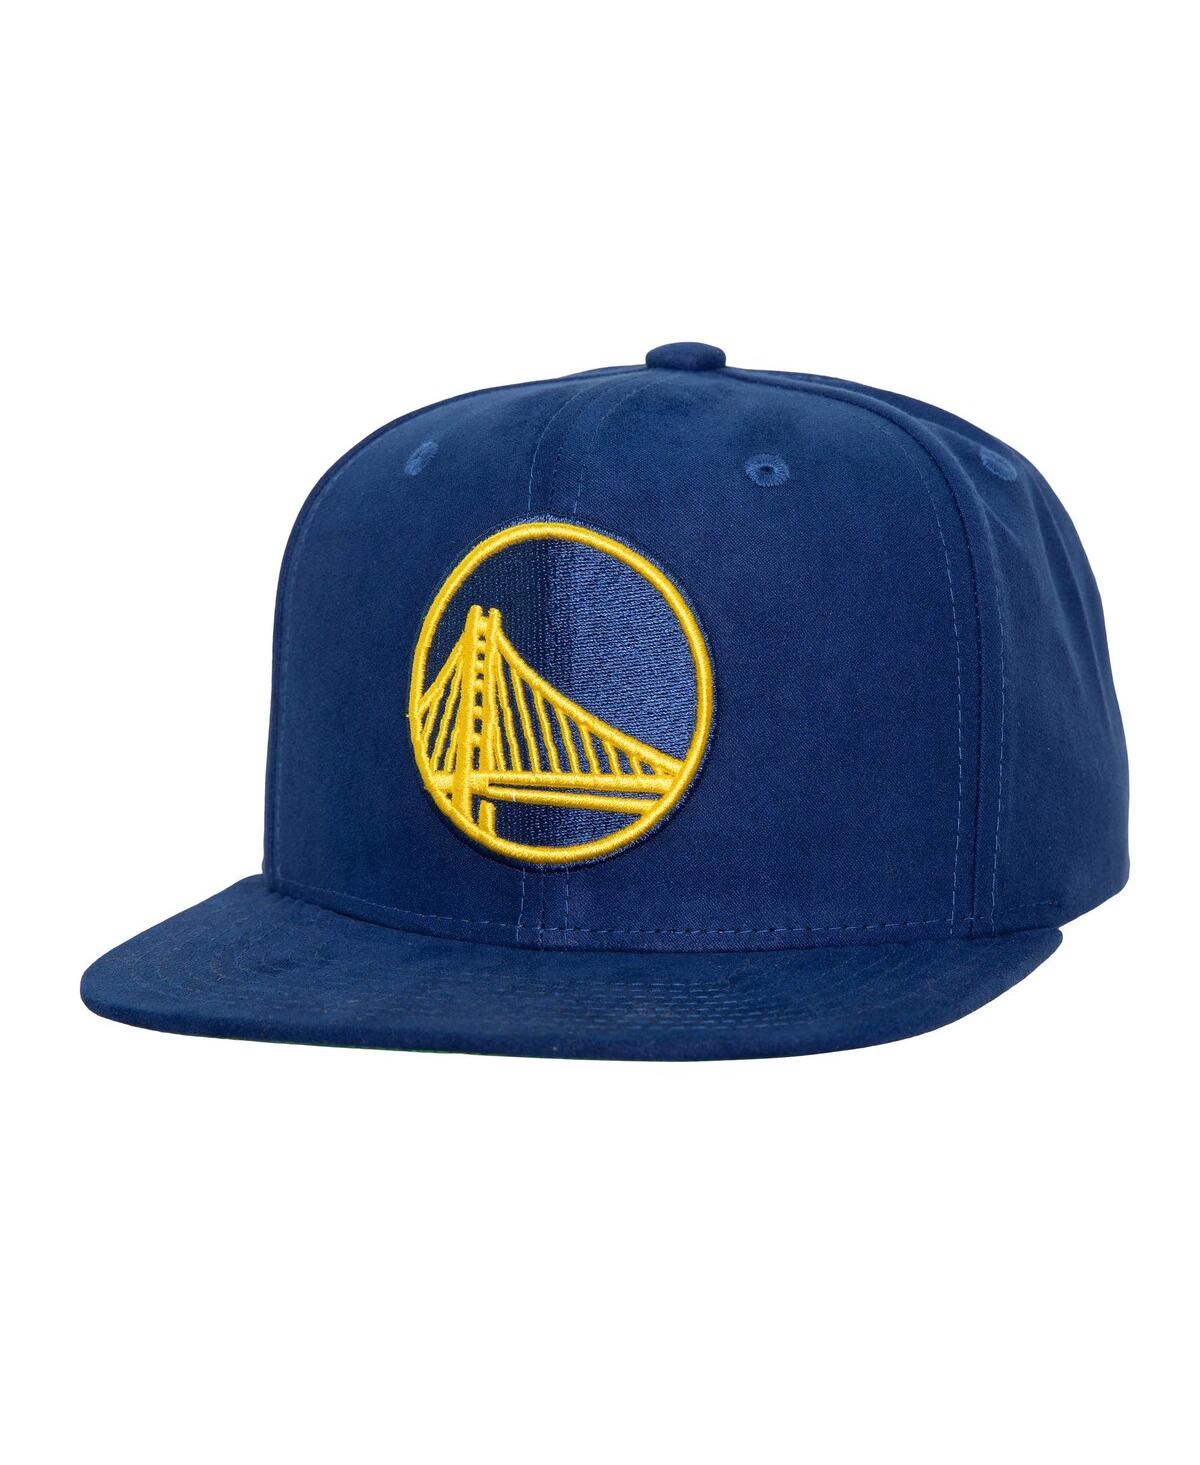 Mitchell Ness Men's Royal Golden State Warriors Sweet Suede Snapback Hat - Royal